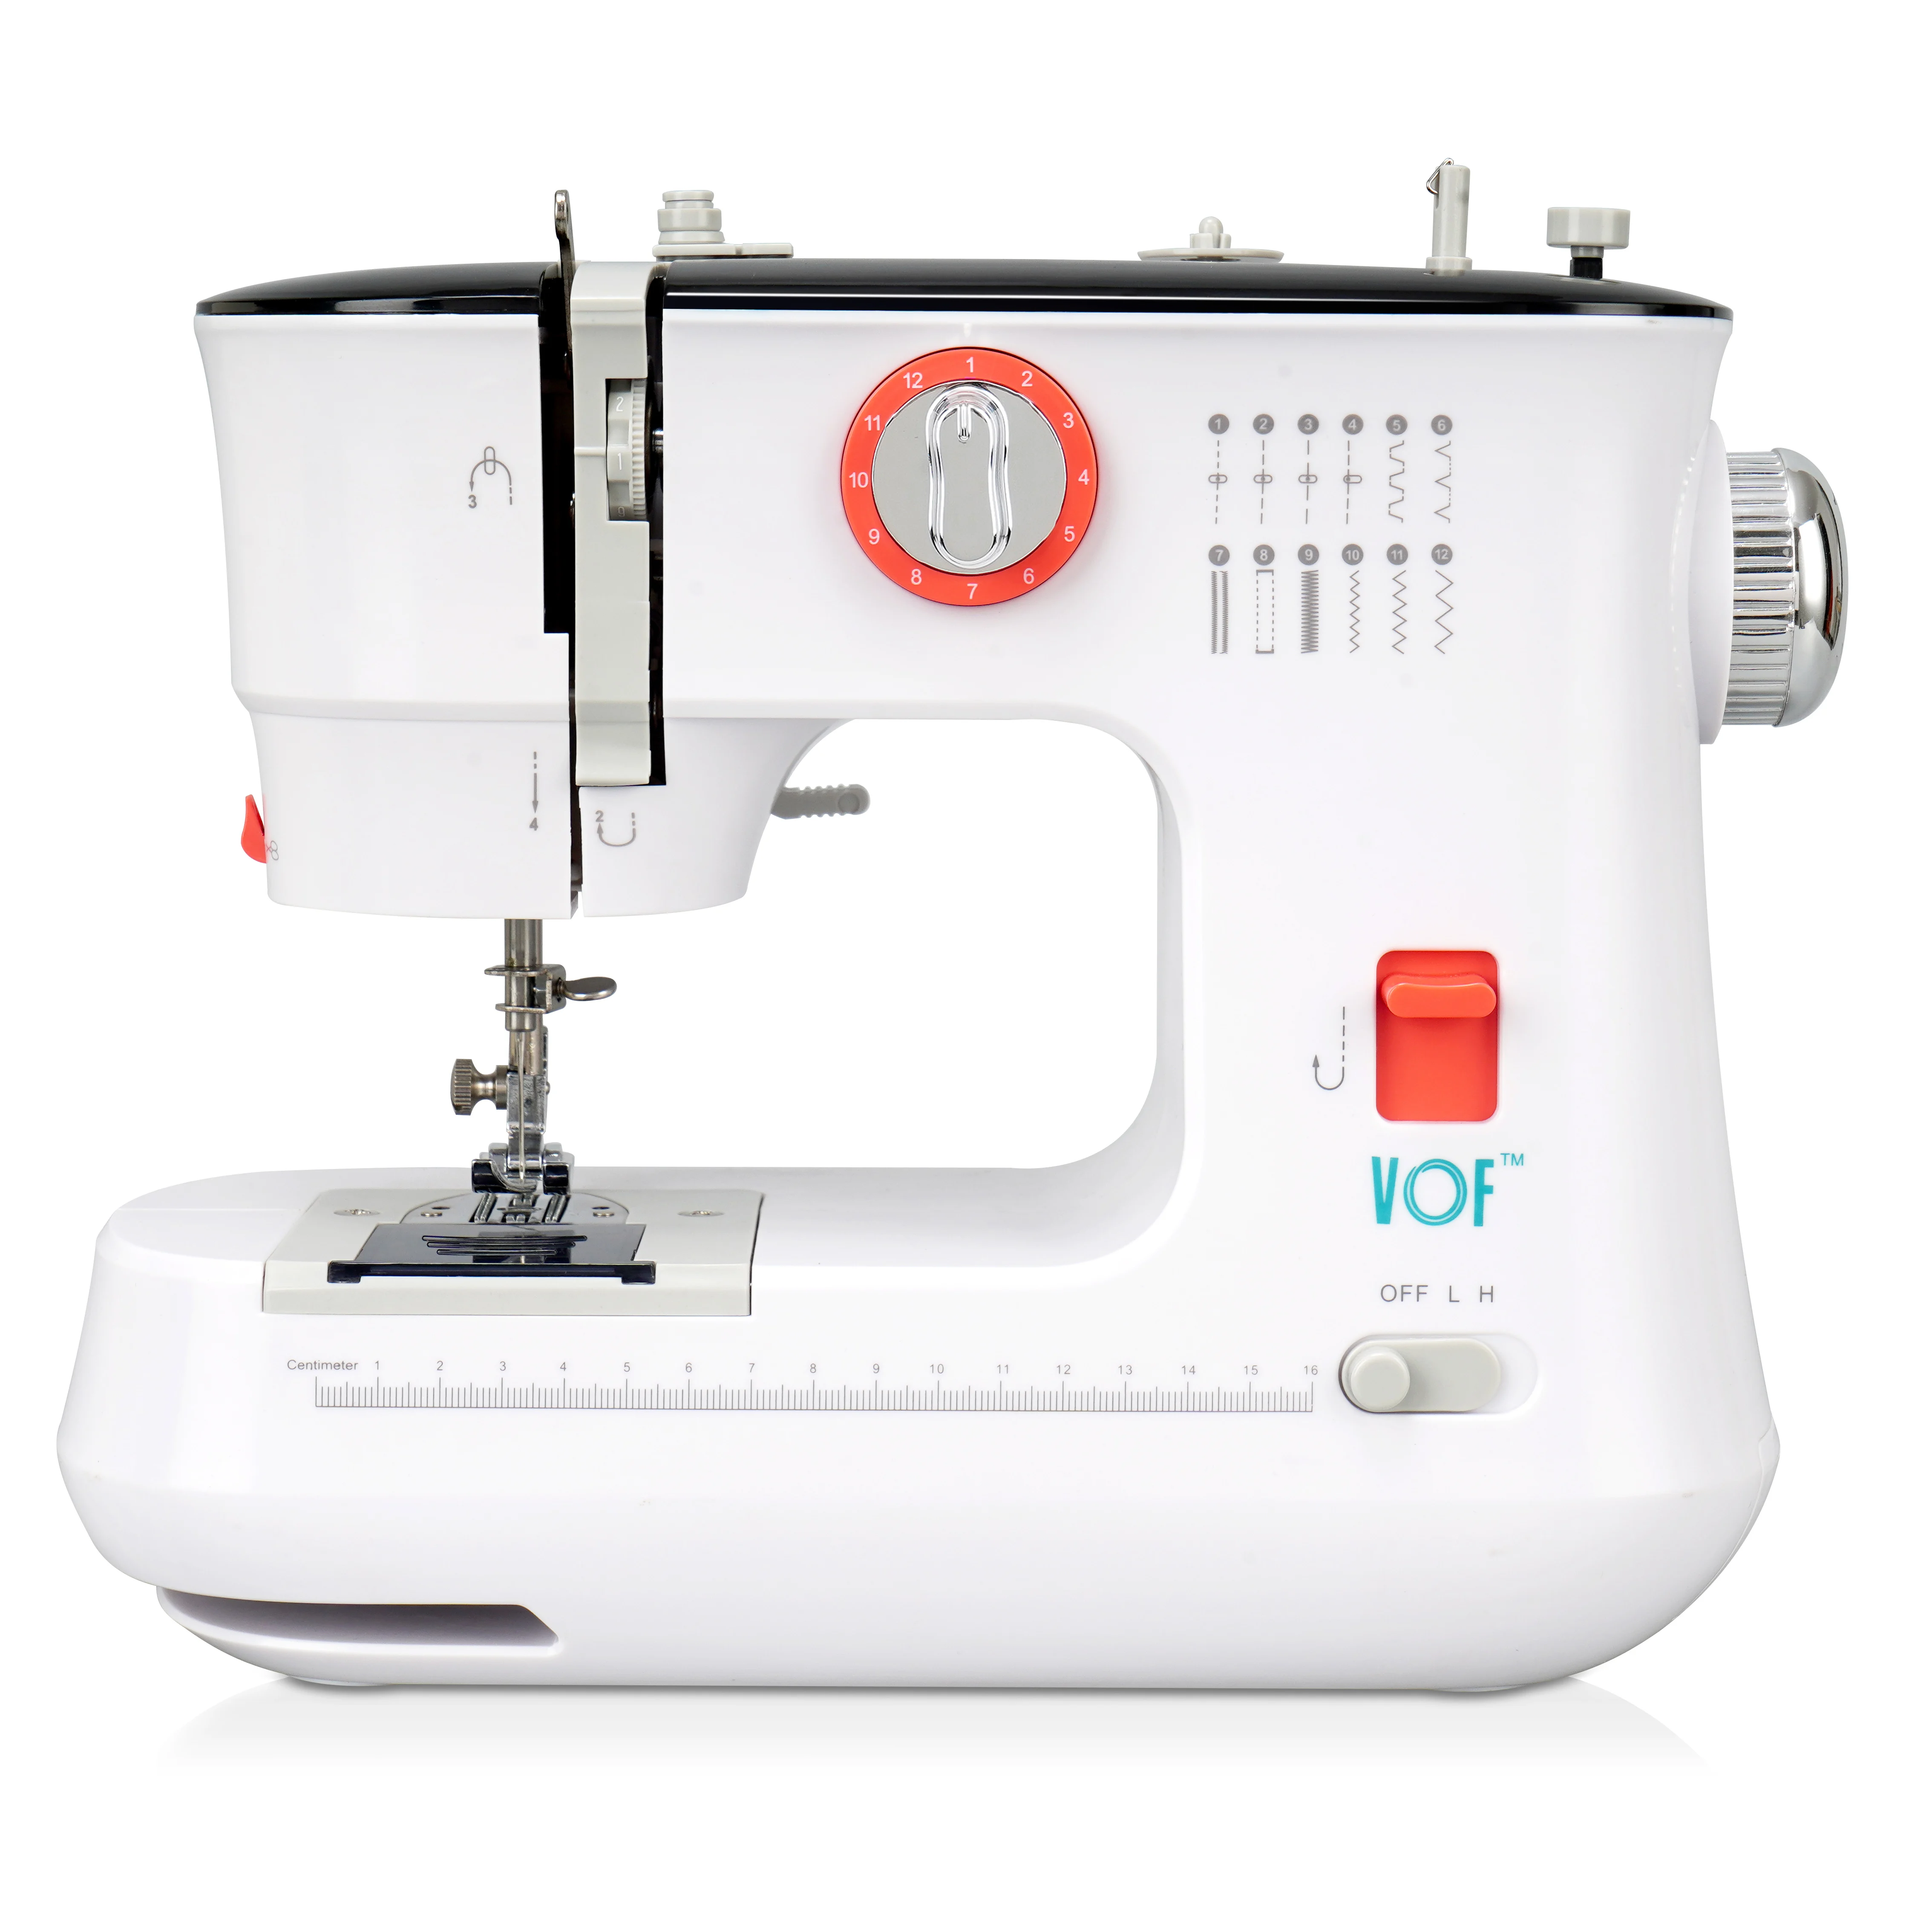 

VOF Hot sale model mini sewing machine electric FHSM 519 double line double needle function automatic pattern sewing machine